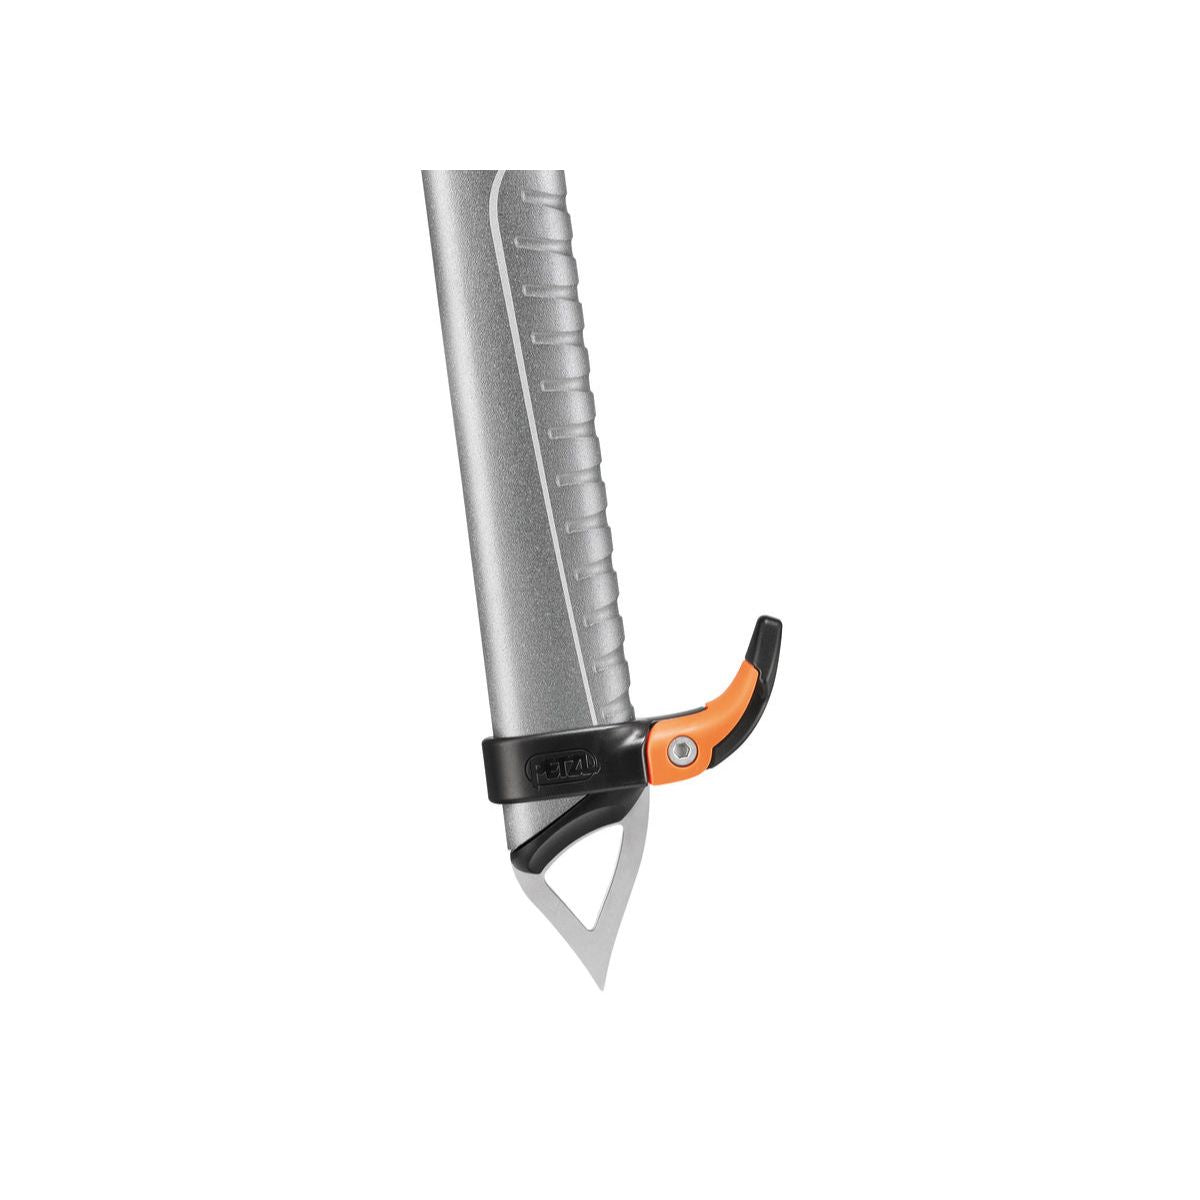 Petzl Trigrest trigger for summit ice axes in black and orange